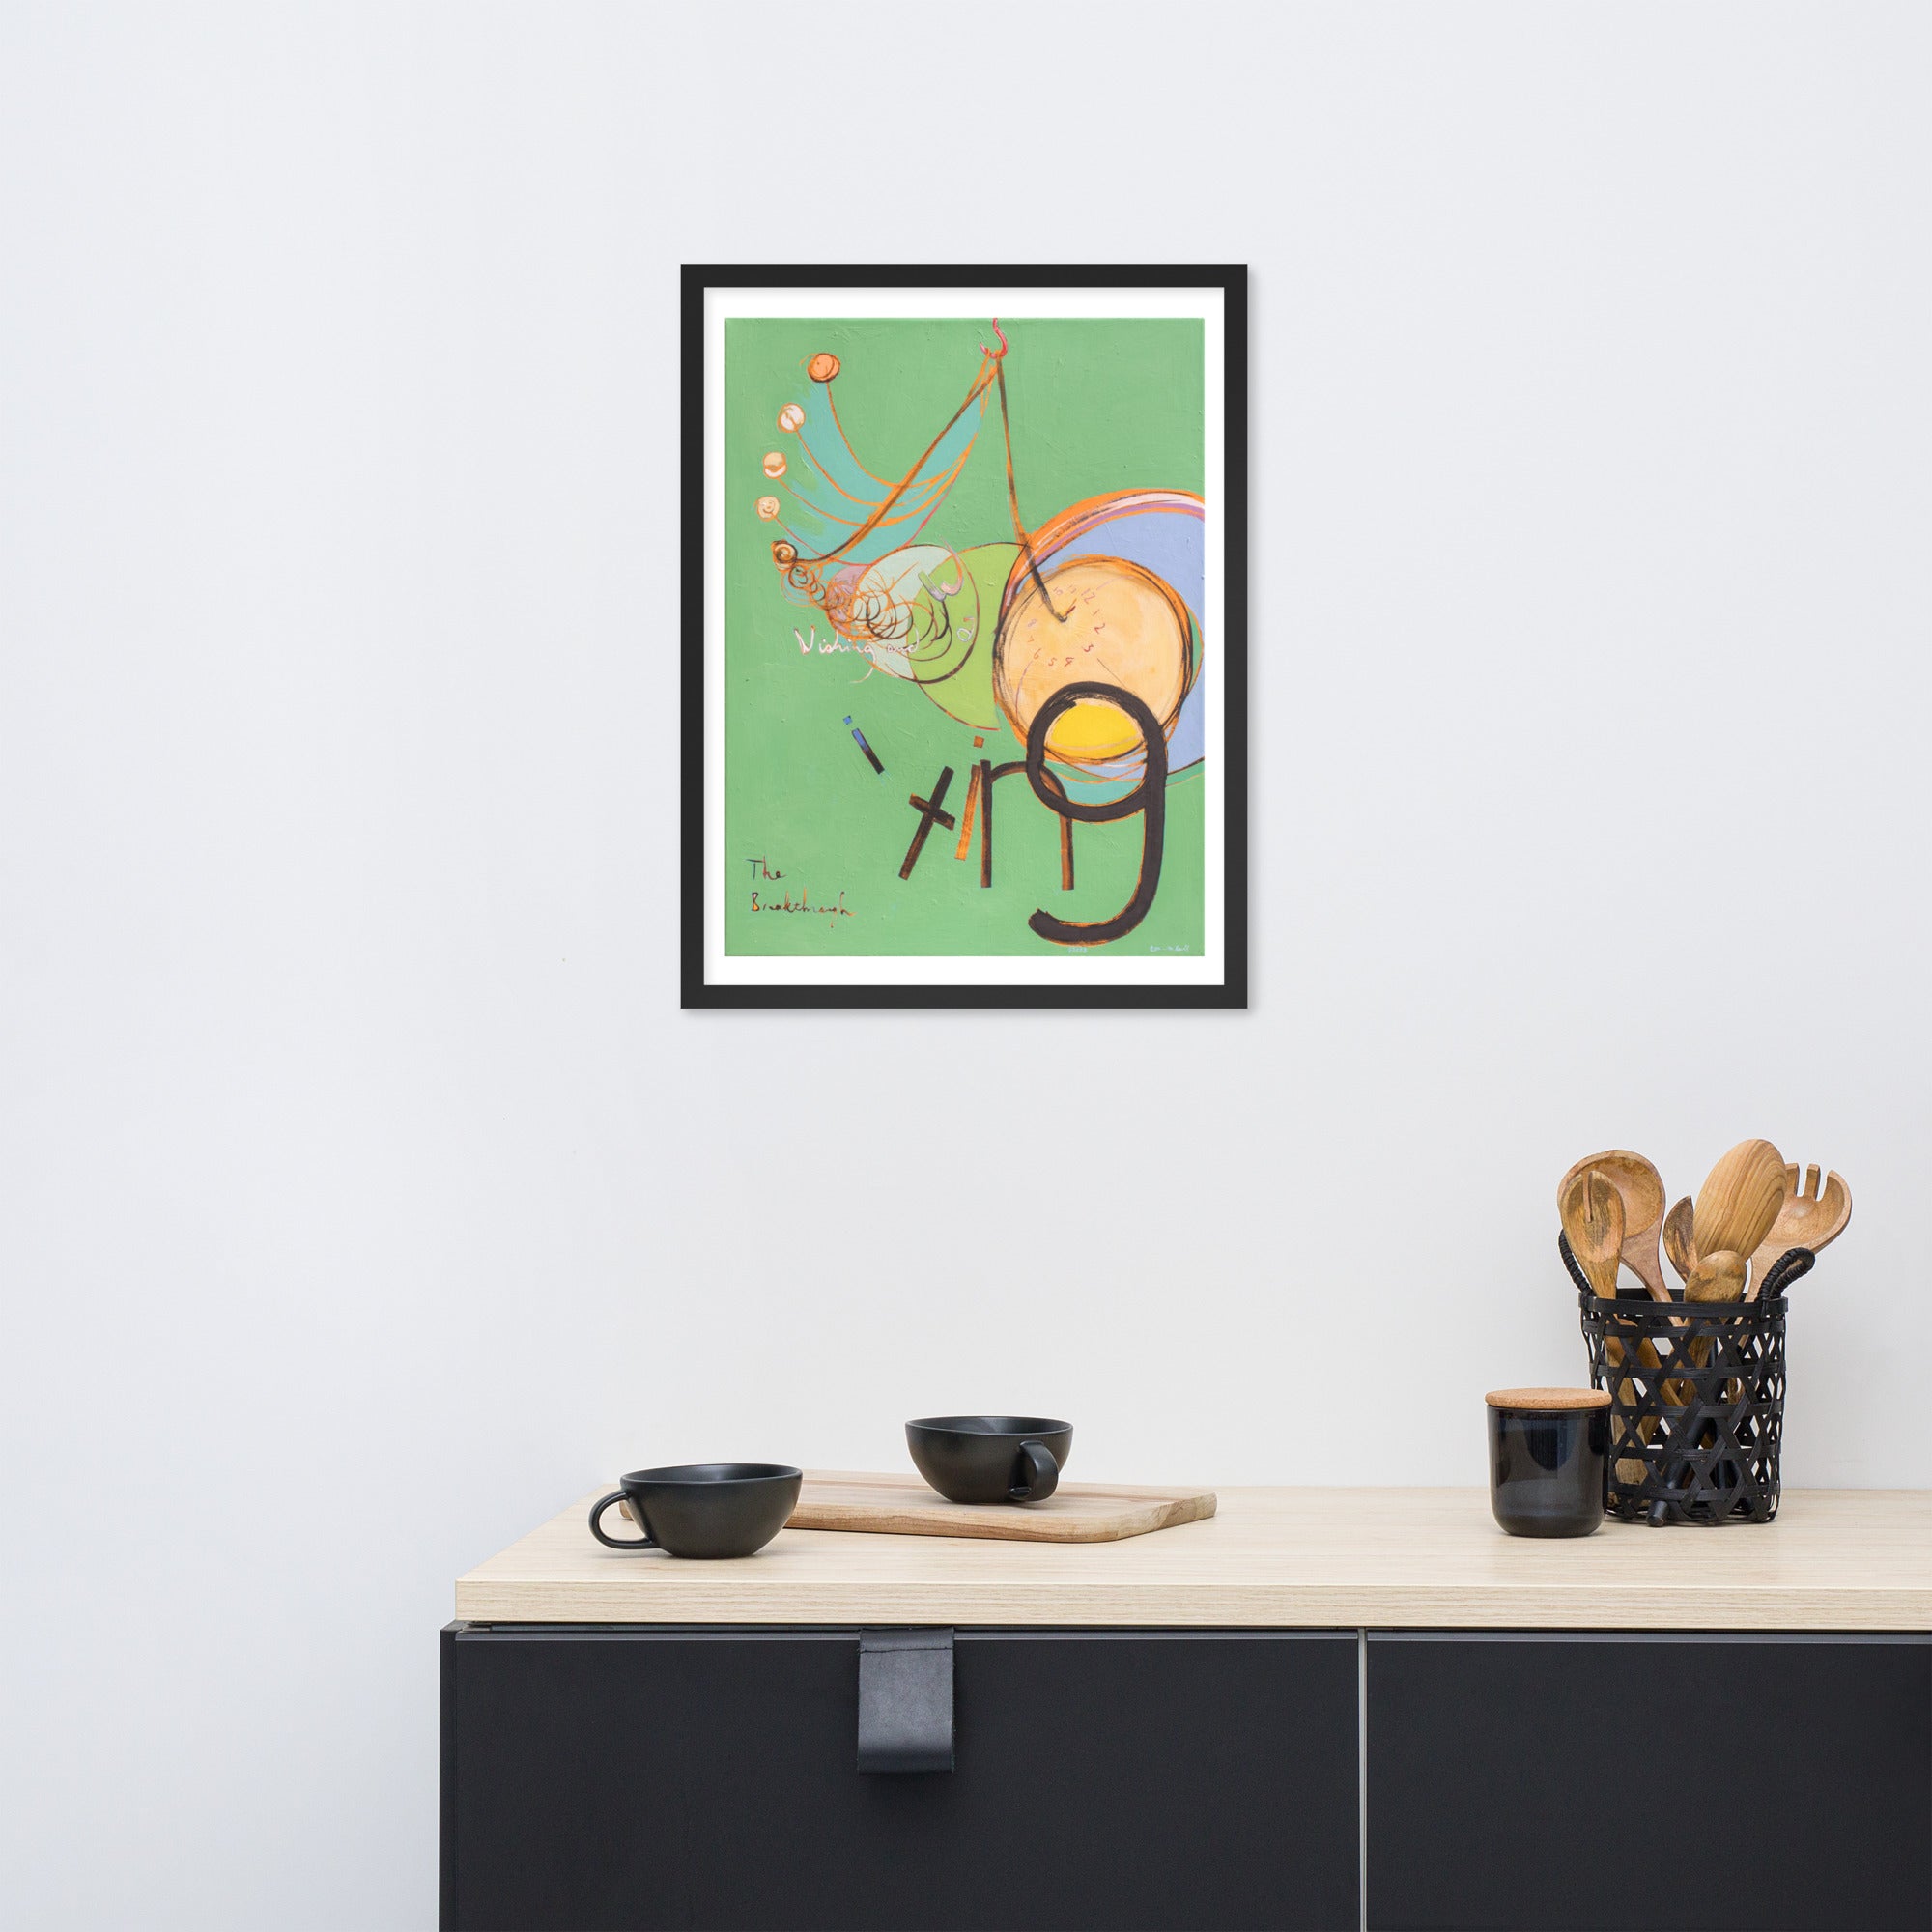 Wishing And Waiting - The Breakthrough #1 [Framed print]